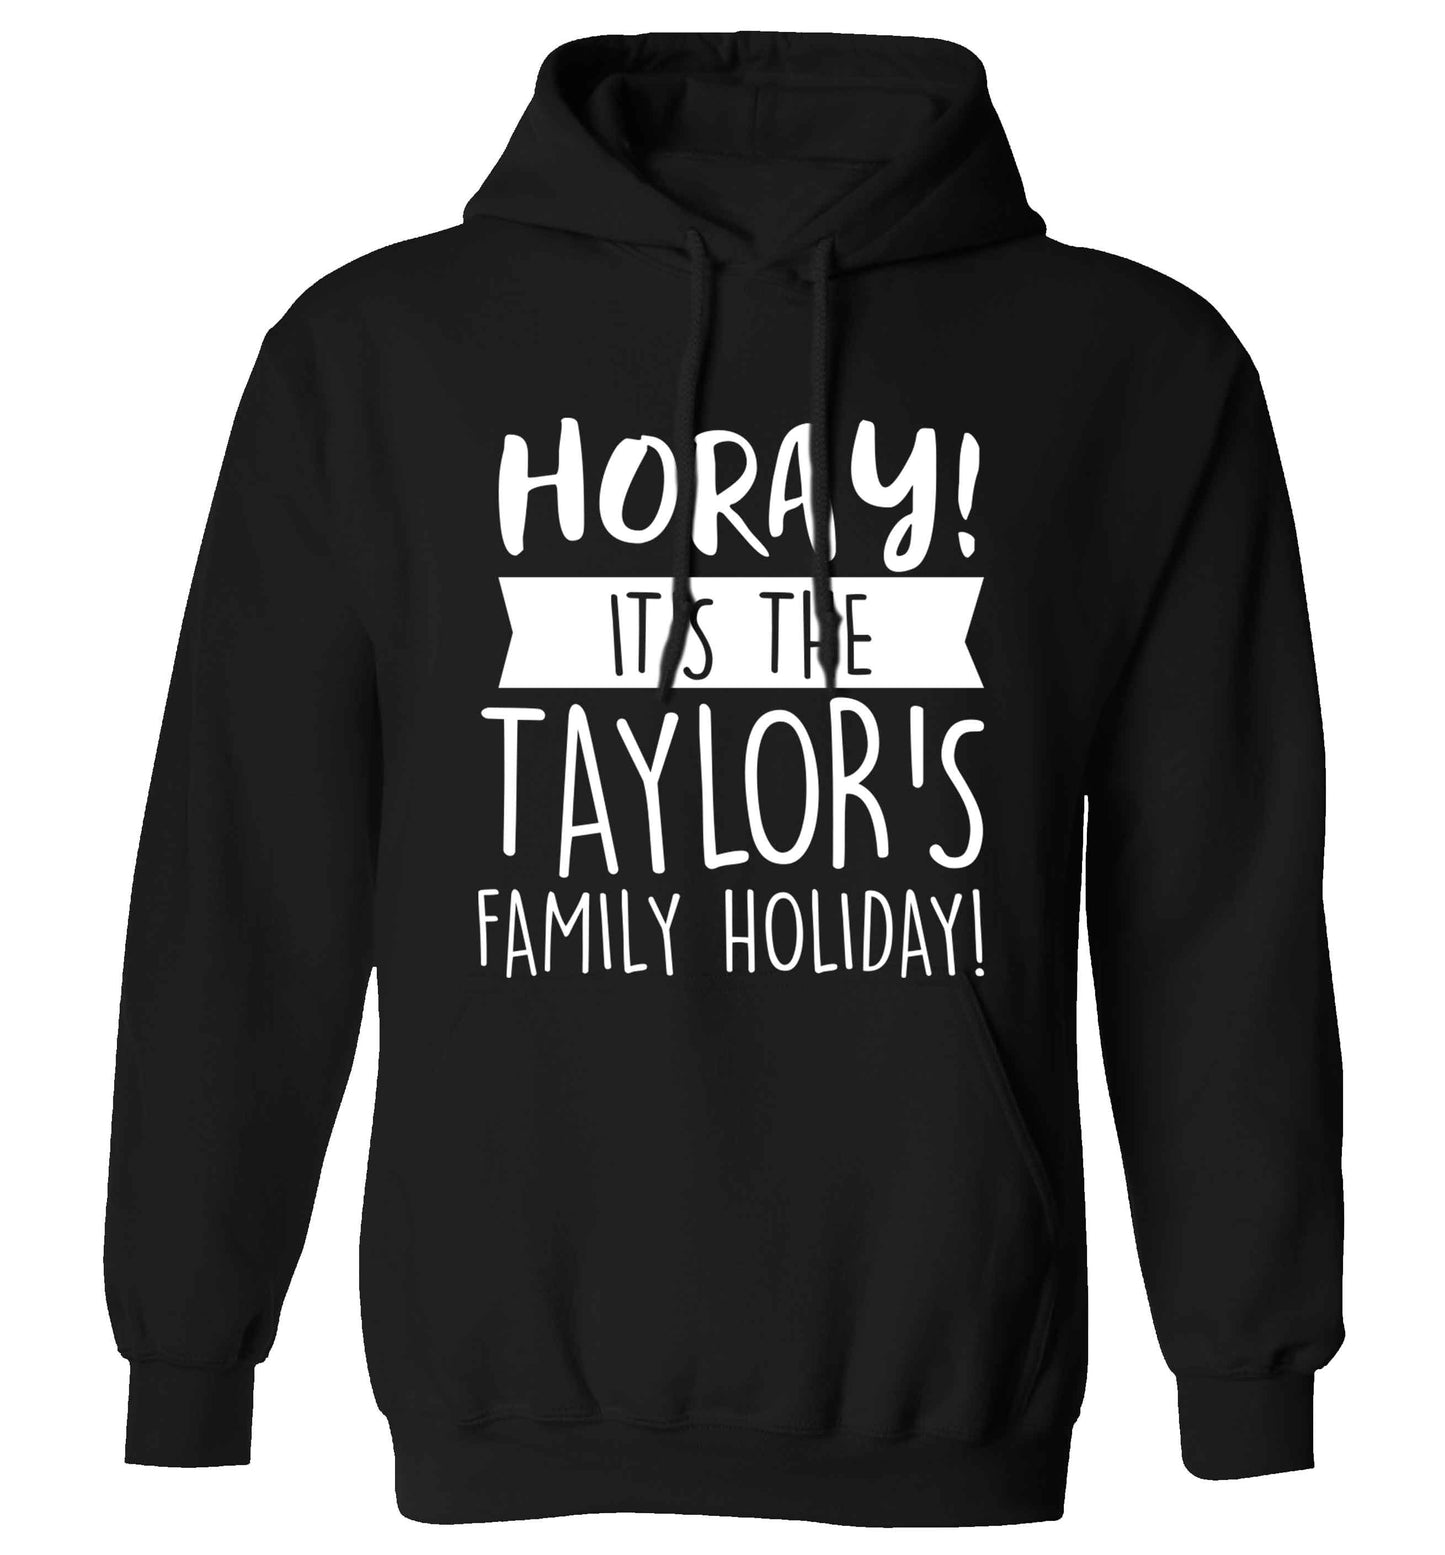 Horay it's the Taylor's family holiday! personalised item adults unisex black hoodie 2XL